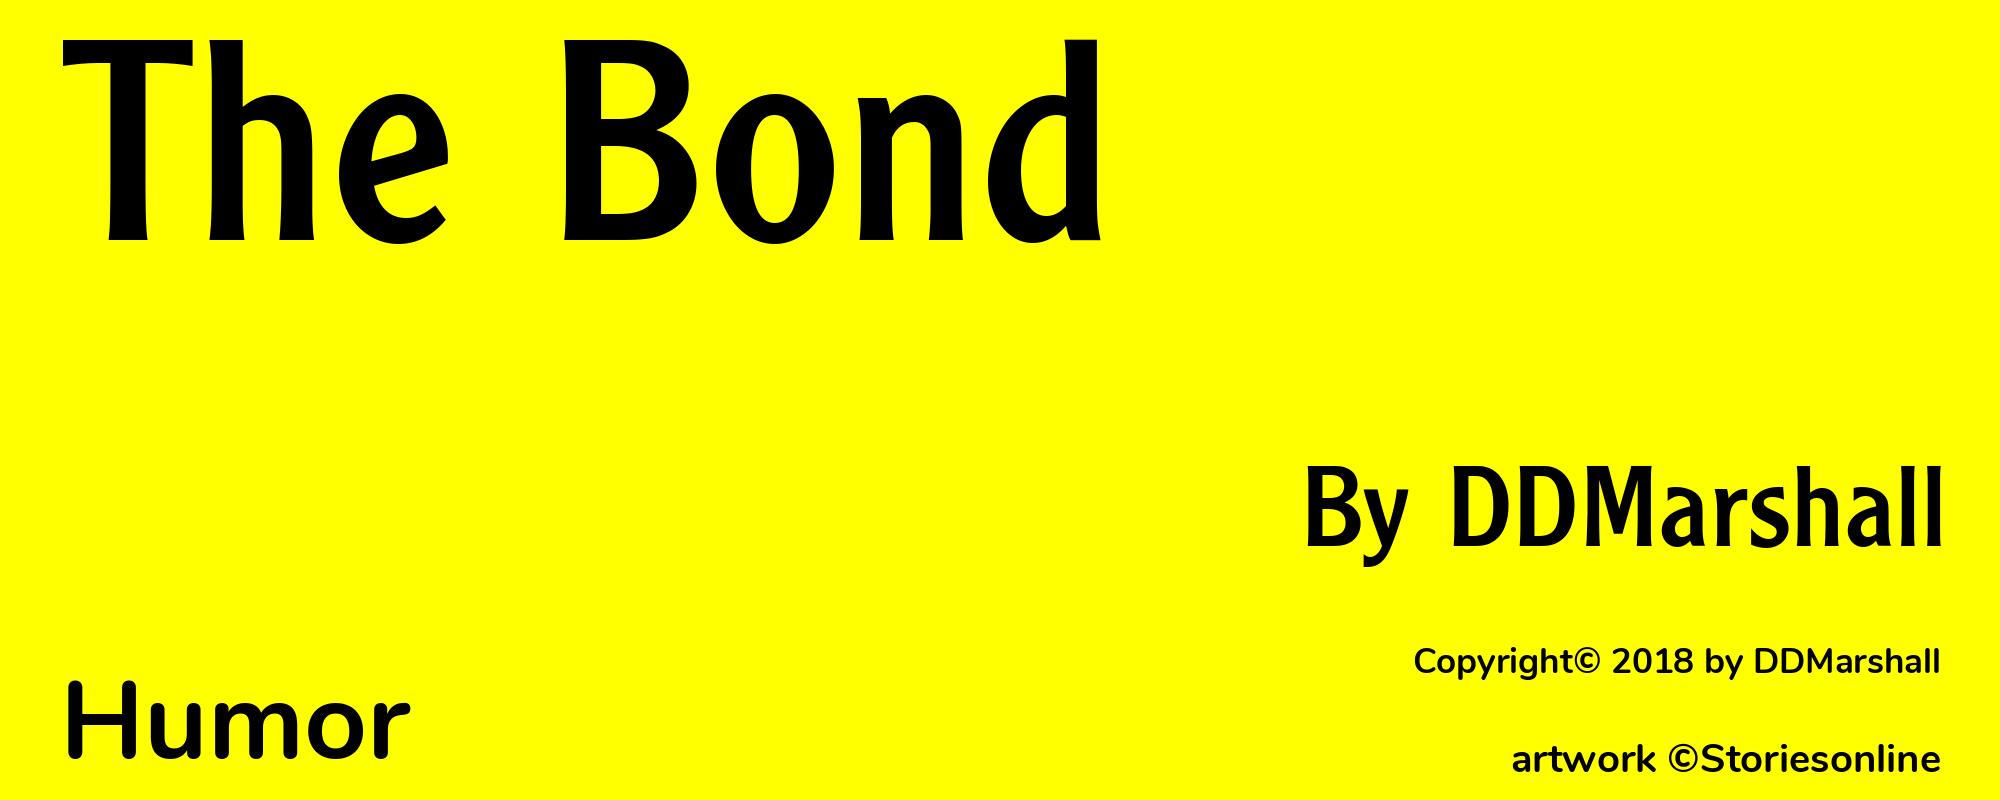 The Bond - Cover